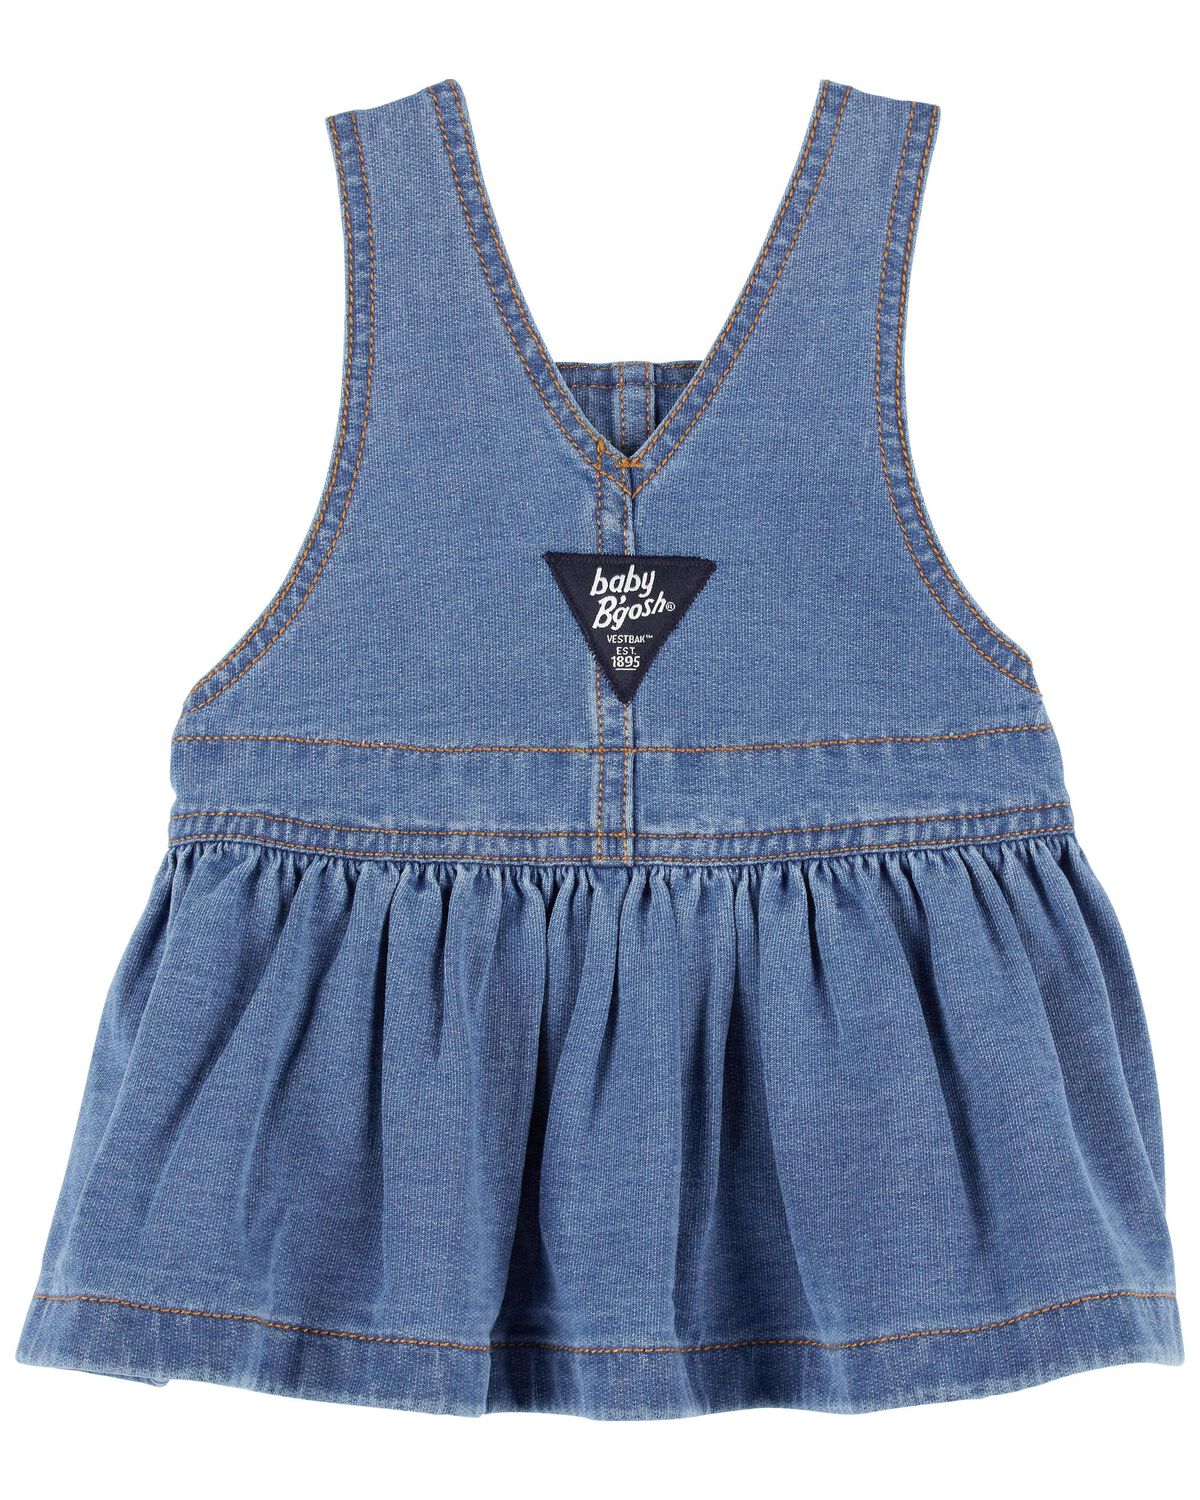 Buy VYN Denim Dungaree Dress for Kids – Darcy (1 Year) at